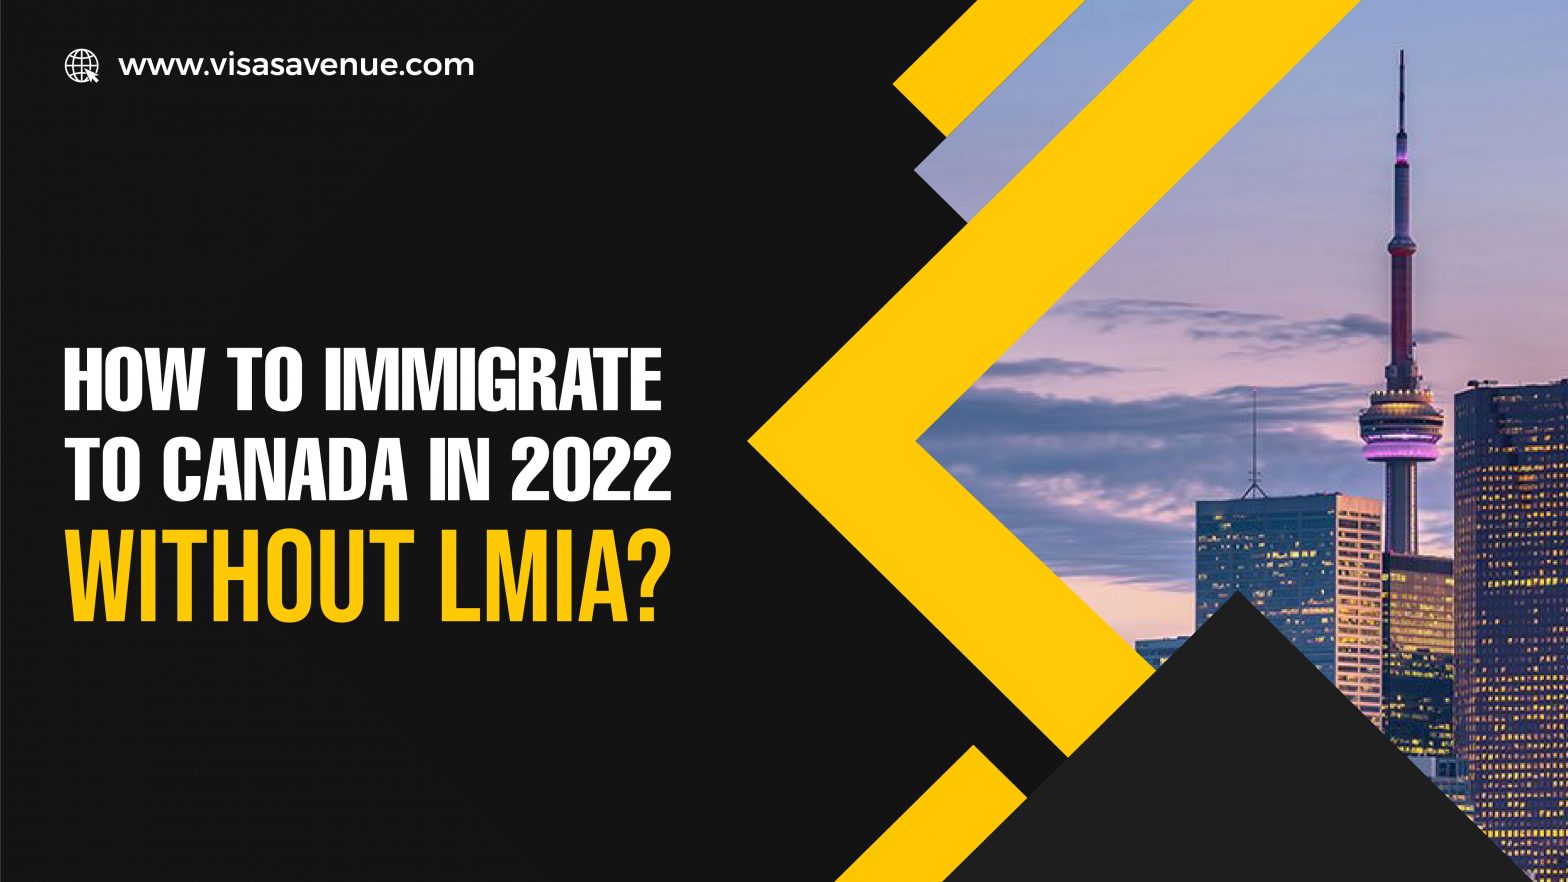 How to immigrate to Canada in 2022 without LMIA